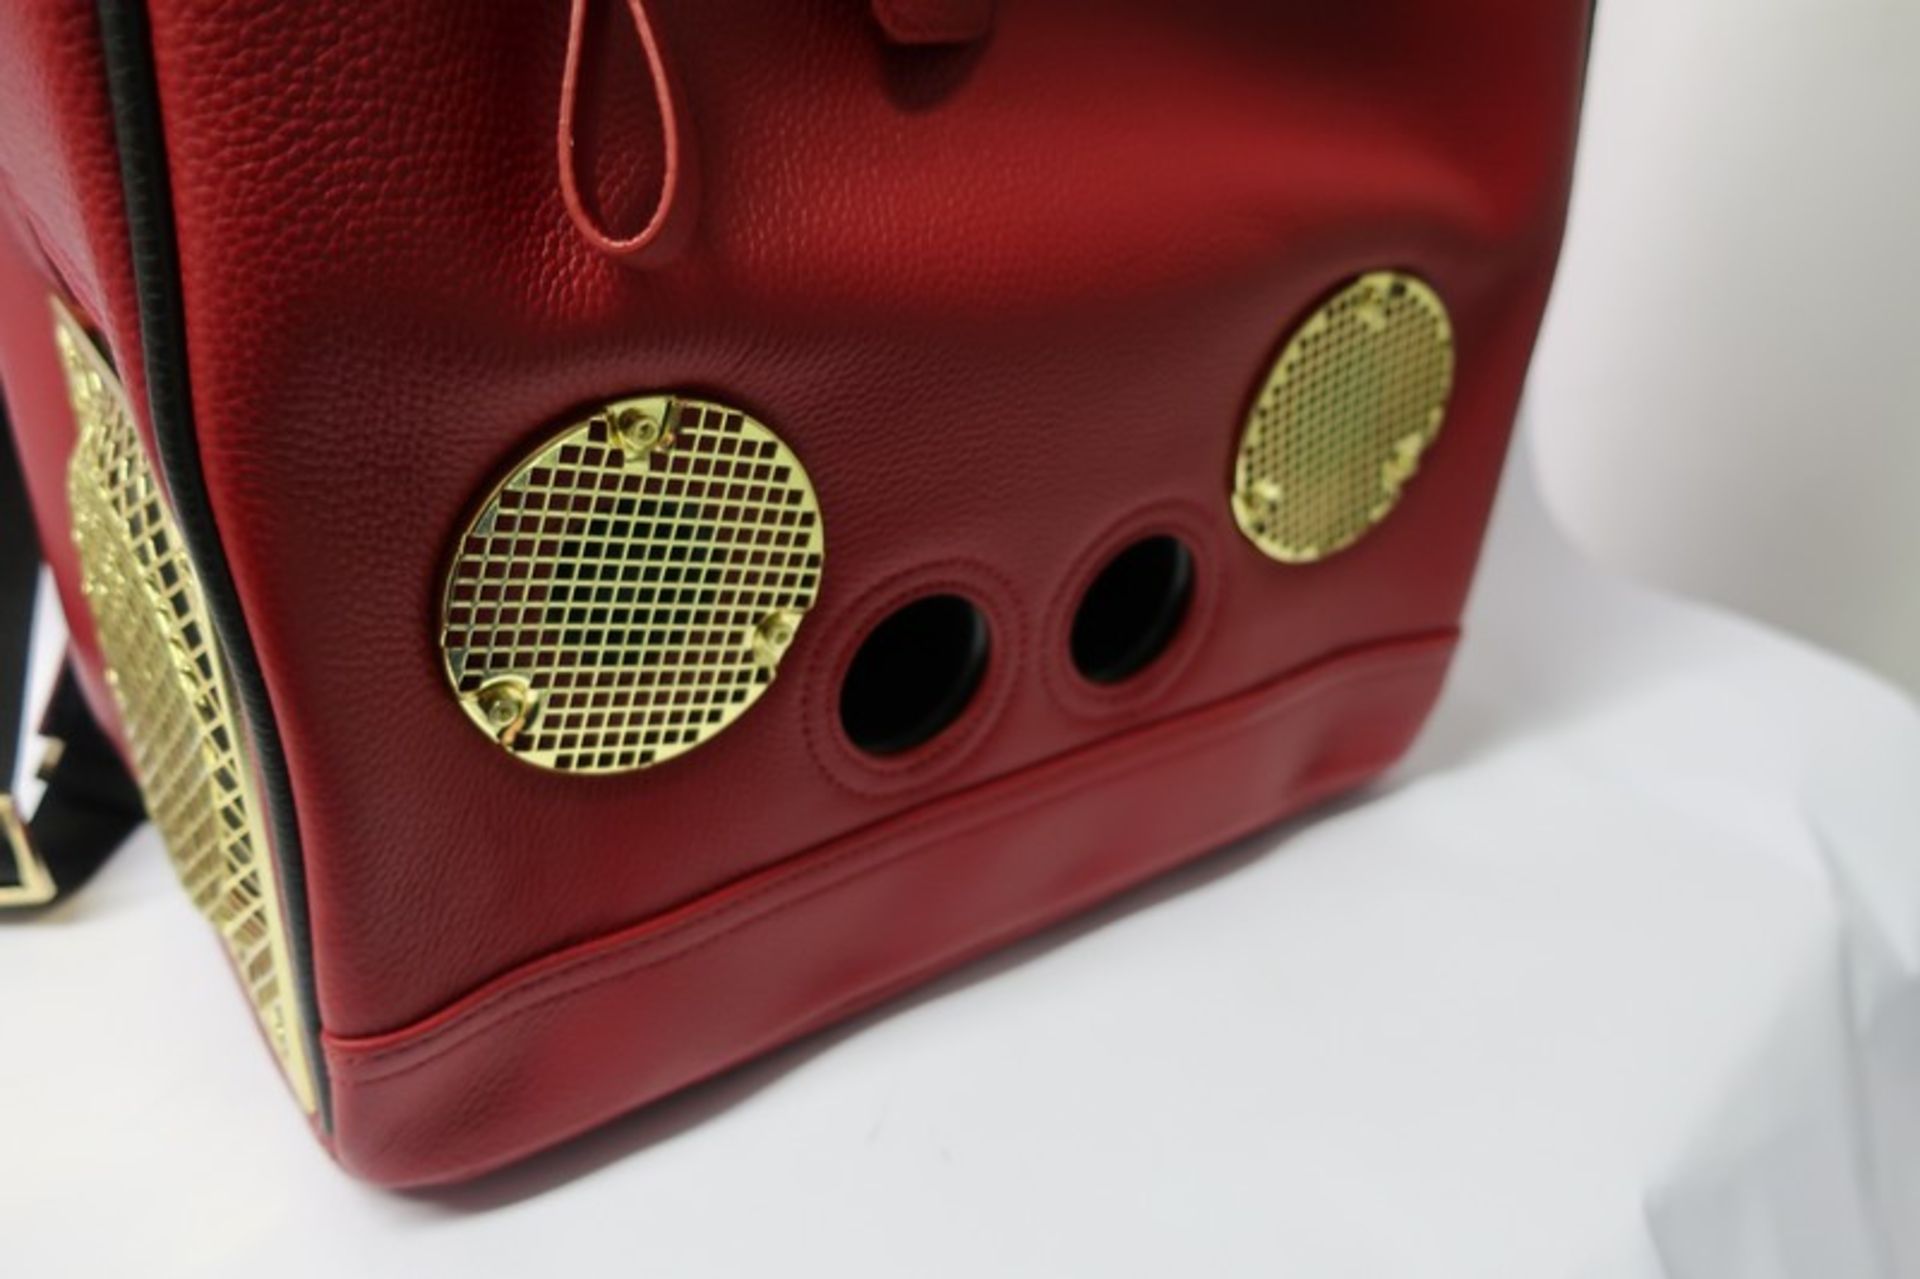 An as new WizPak sound system backpack in red leather with dust bag. - Image 5 of 7